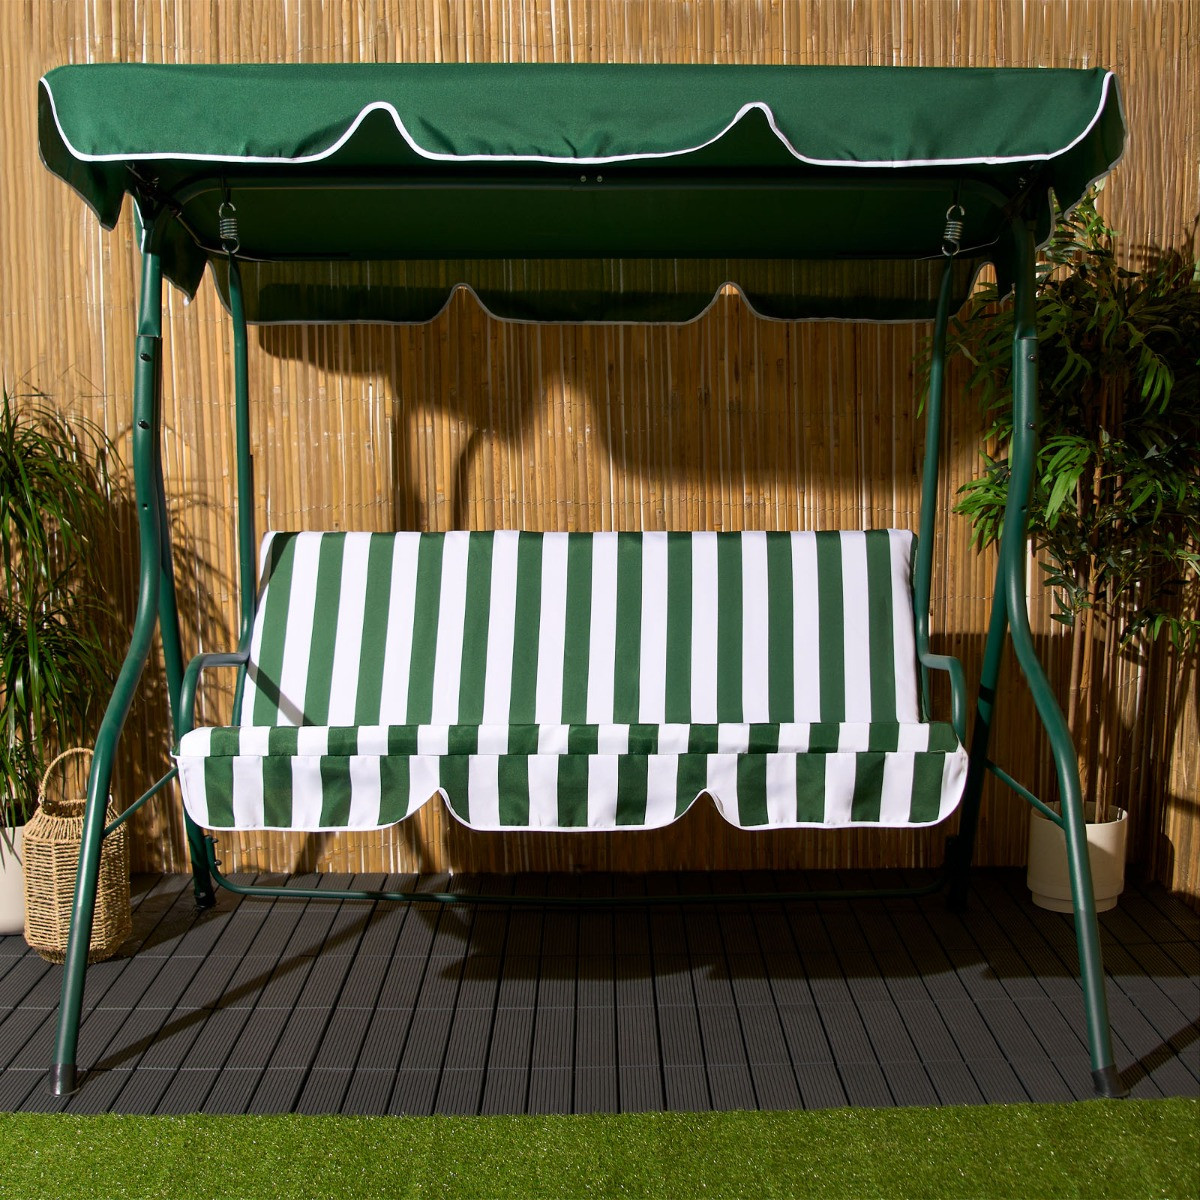 OHS 3 Seater Swing Bench With Canopy - Green / White Stripe>